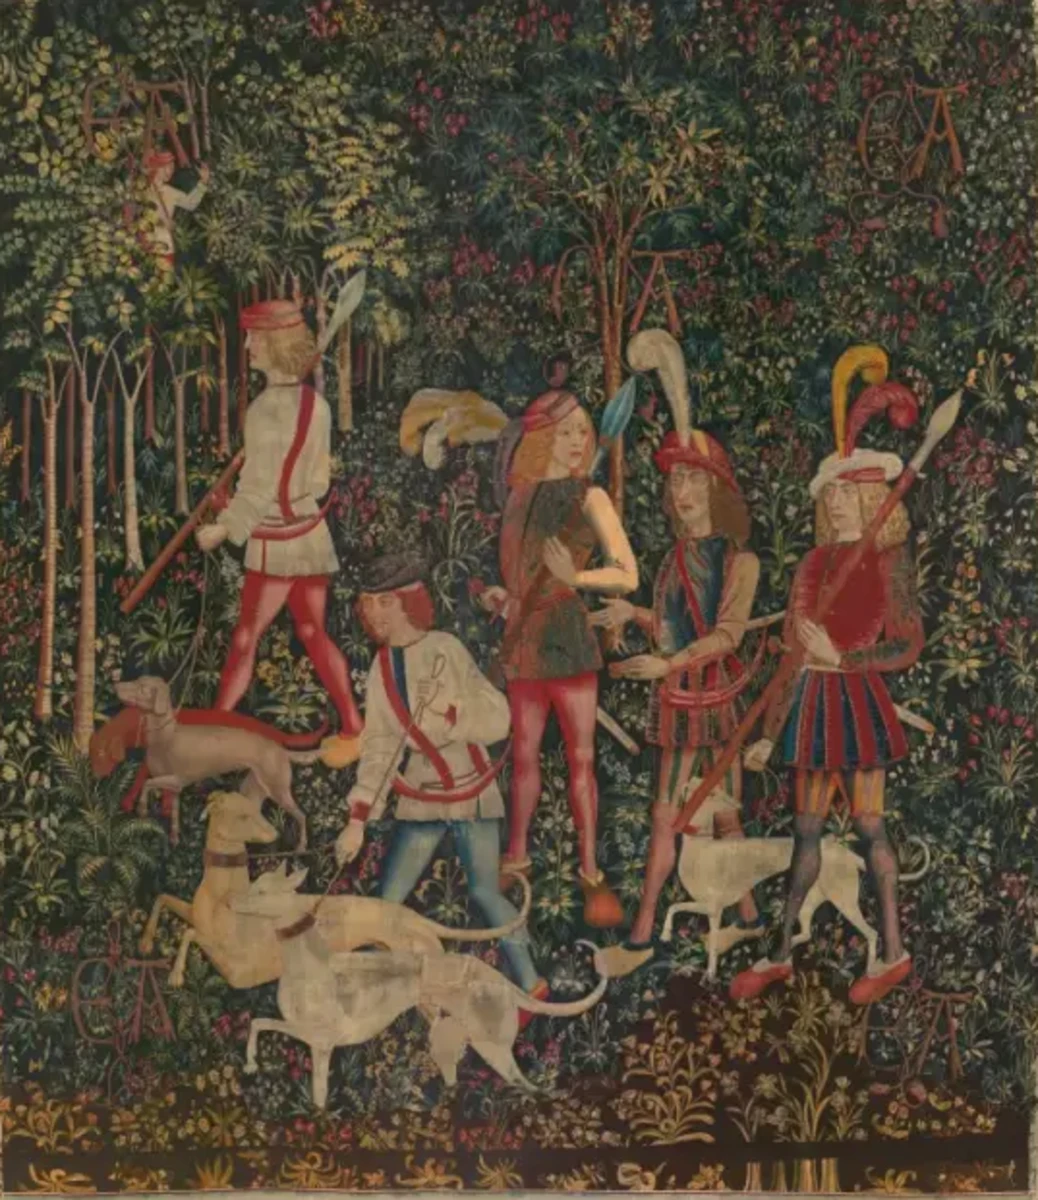 Tapestry 1: Hunters Enter the Woods. This tapestry of a group of noblemen and hunters, like “The Unicorn in Captivity,” is set against a millefleurs background: a field of dark green spangled with blossoming trees and flowers. Of the 101 species of plants represented, 85 have been identified, including the prominent cherry tree behind the hunters and lush date palm in front of the sniffing hound. The cipher “AE” that is woven into each of the tapestries — and repeated here five times — alludes to their original owners, who remain unknown.